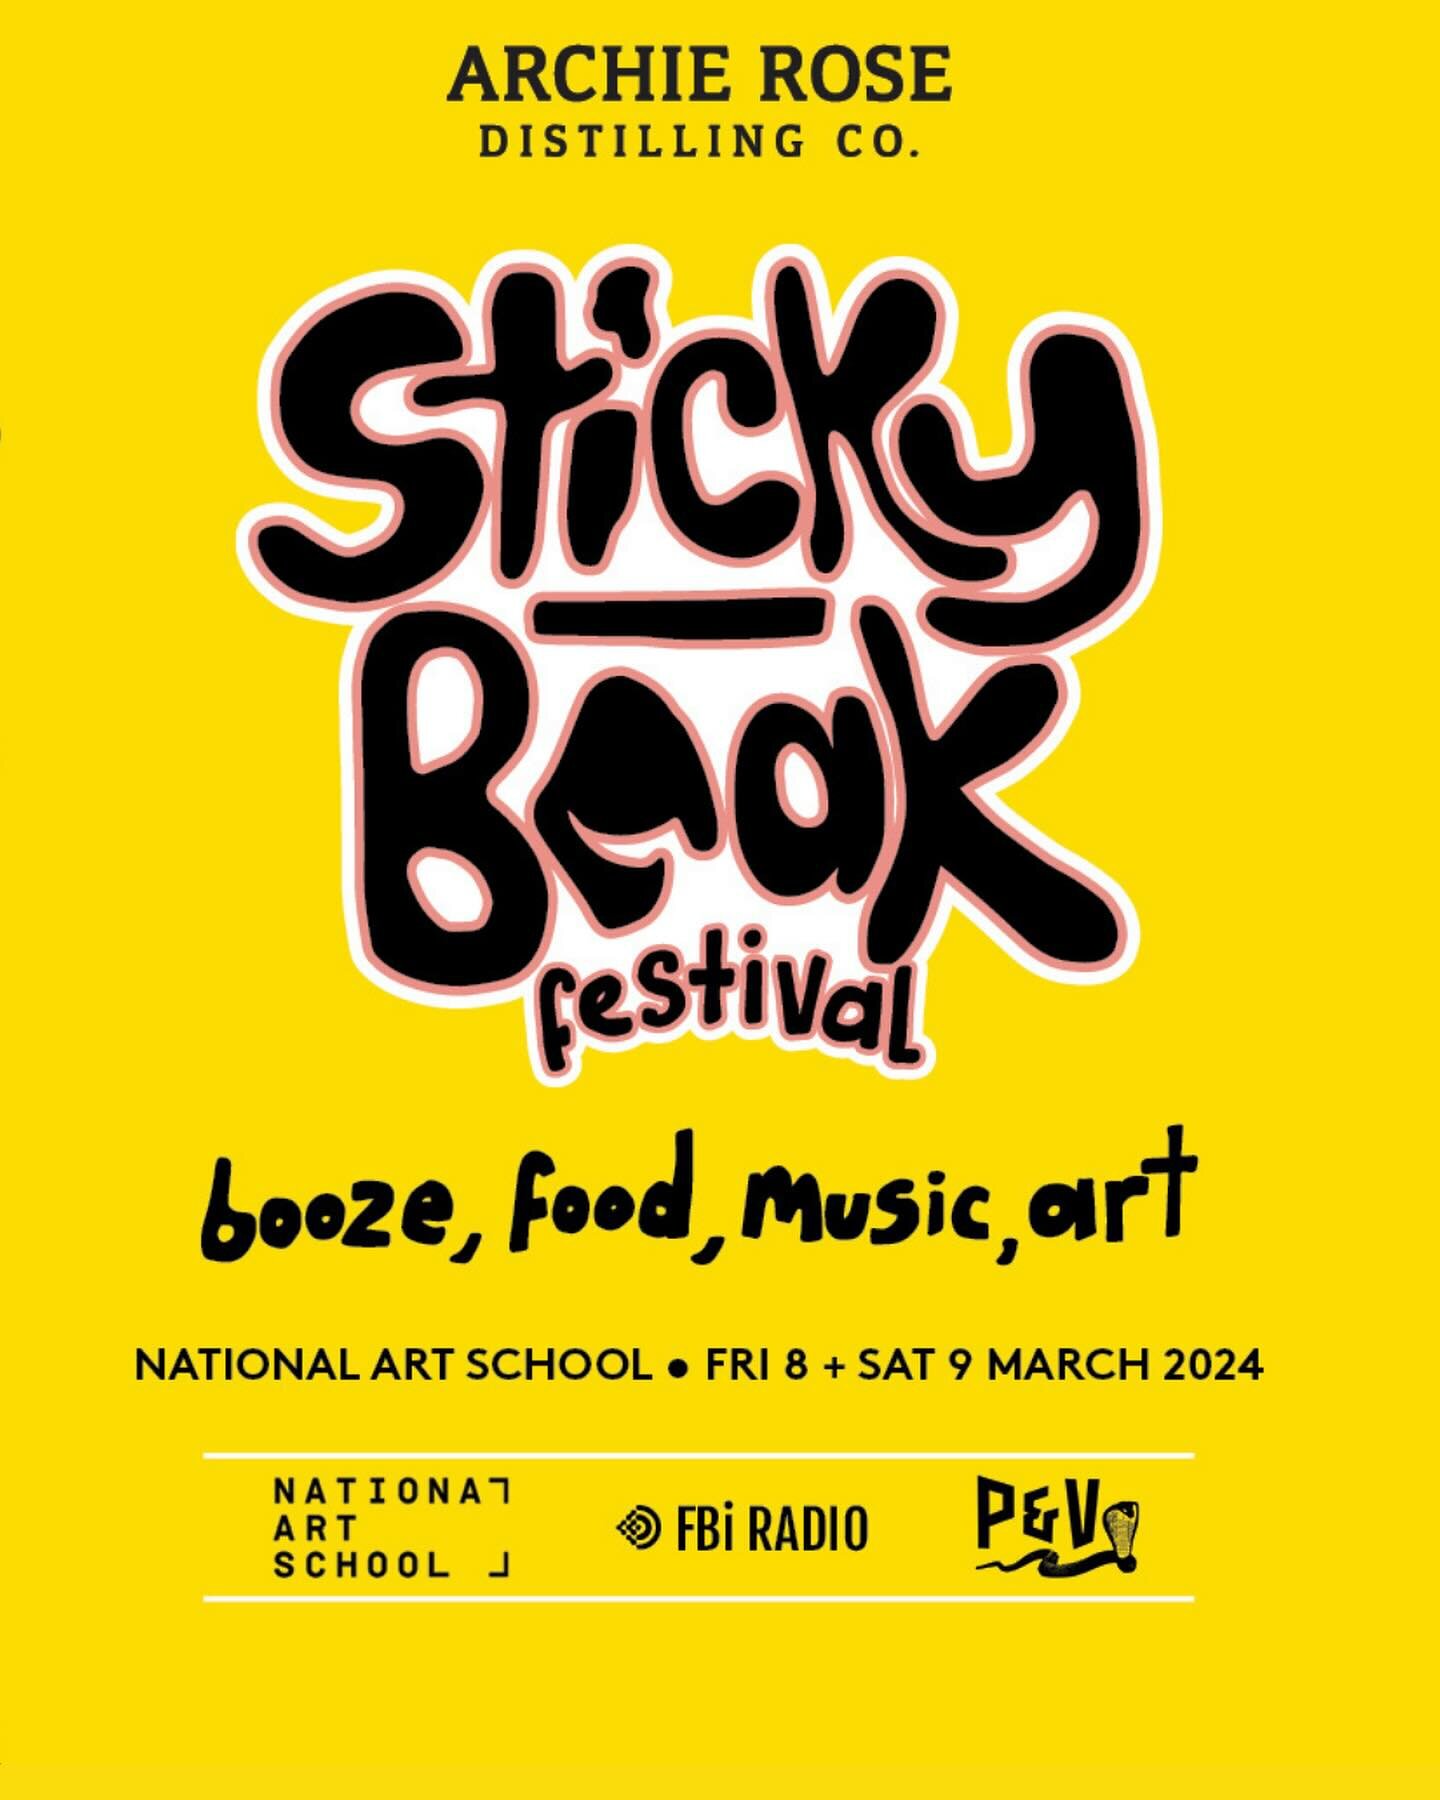 Sticky Beak Sneak Peek!

We will be slinging some delicious house made sausages from our Sausage Sizzle Stand at Sticky Beak Festival on March 8th &amp; 9th. 

Complete with Porcine&rsquo;s famous tarragon mustard &amp; sherried onions on a soft roll